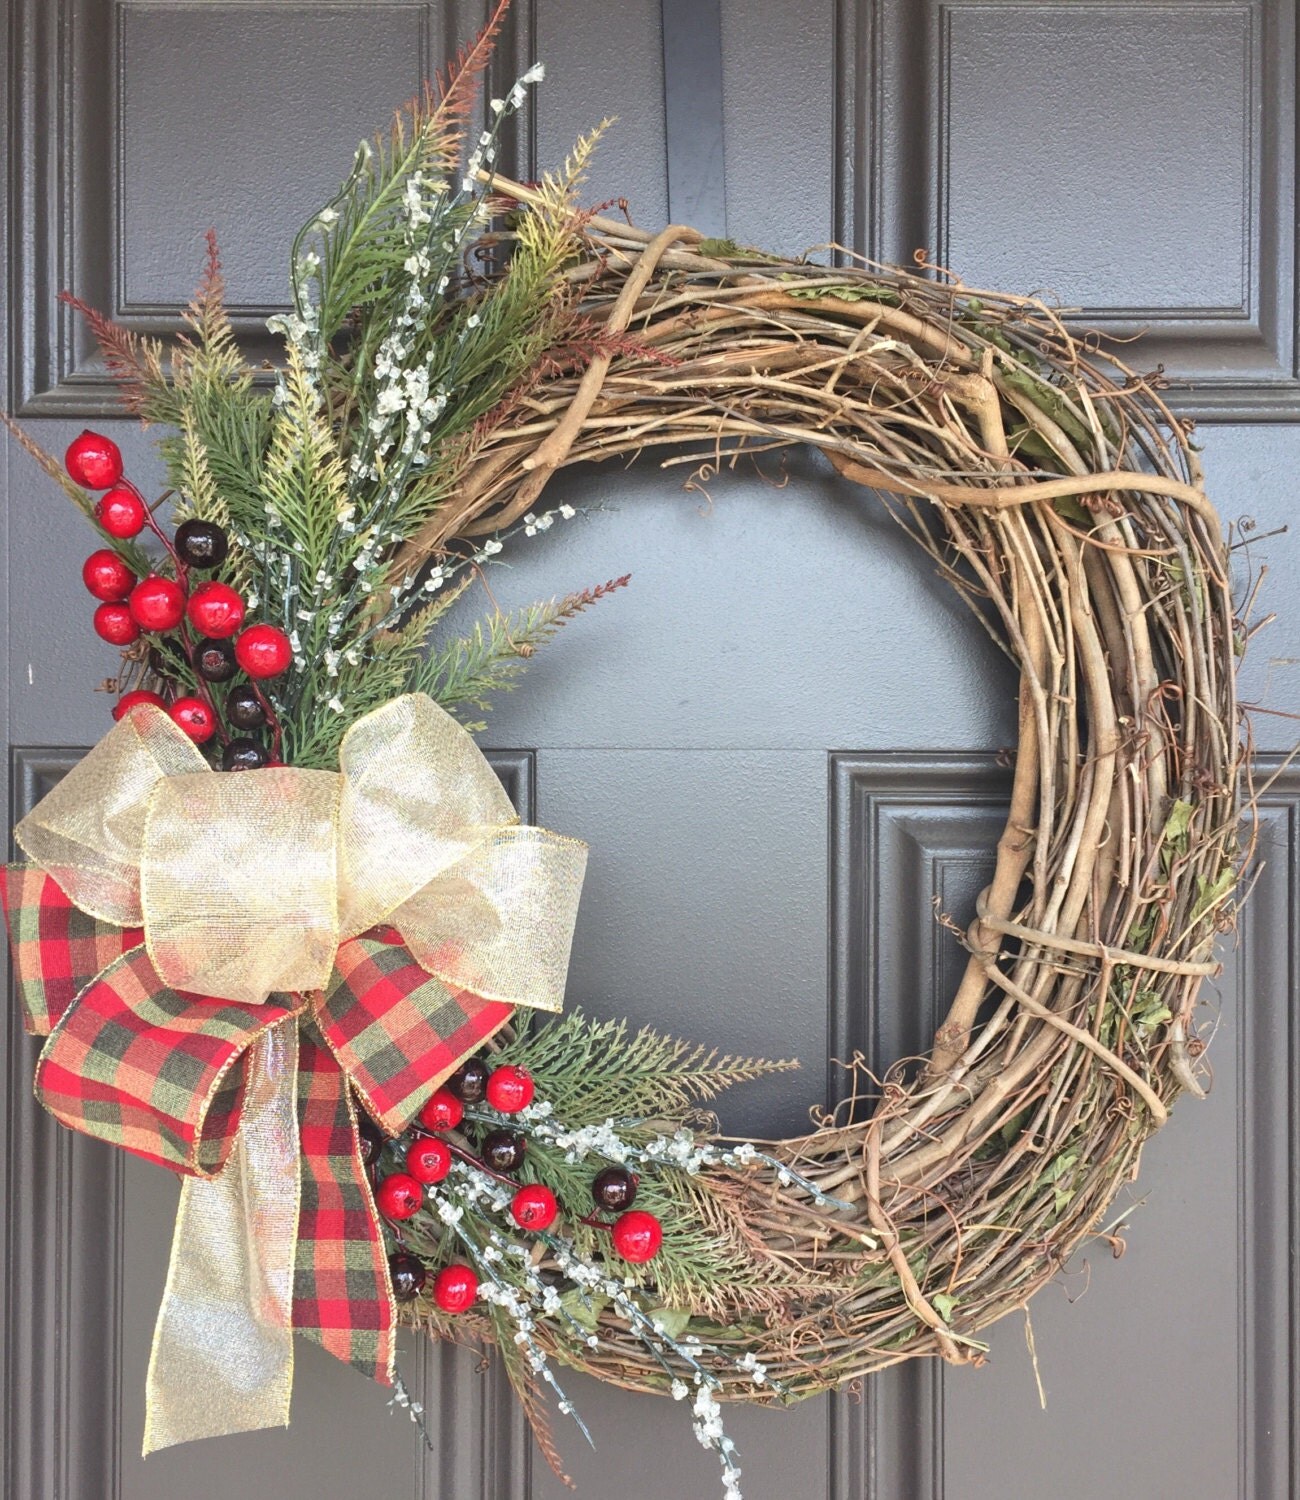 Rustic Christmas wreath with large gold and plaid bow